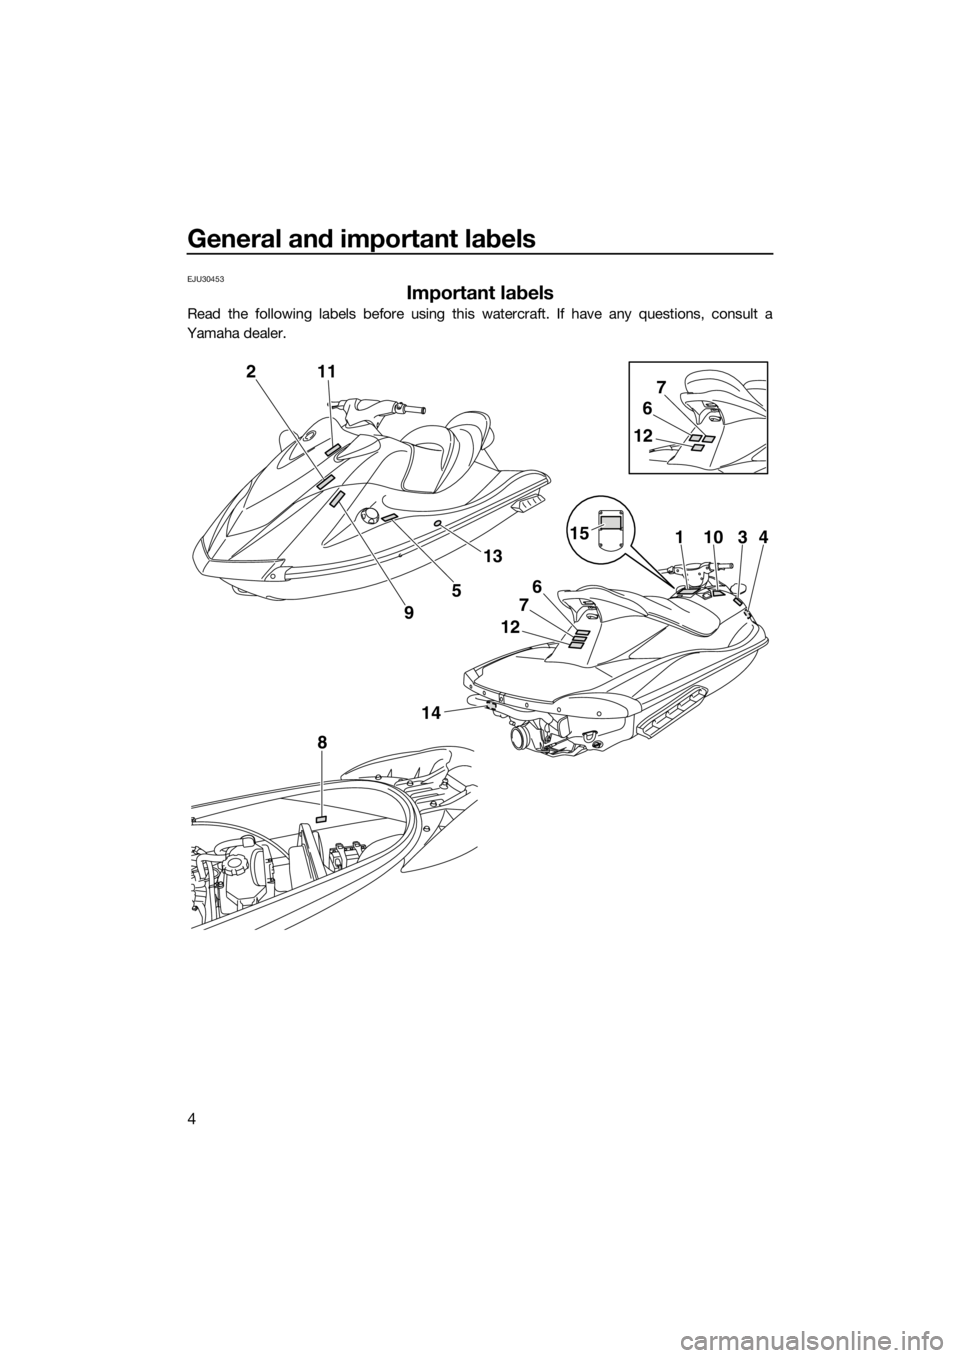 YAMAHA VX 2014  Owners Manual General and important labels
4
EJU30453
Important labels
Read the following labels before using this watercraft. If have any questions, consult a
Yamaha dealer.
2
14
8
12
6
7
15
6
7
12
11034
11
9
5
13